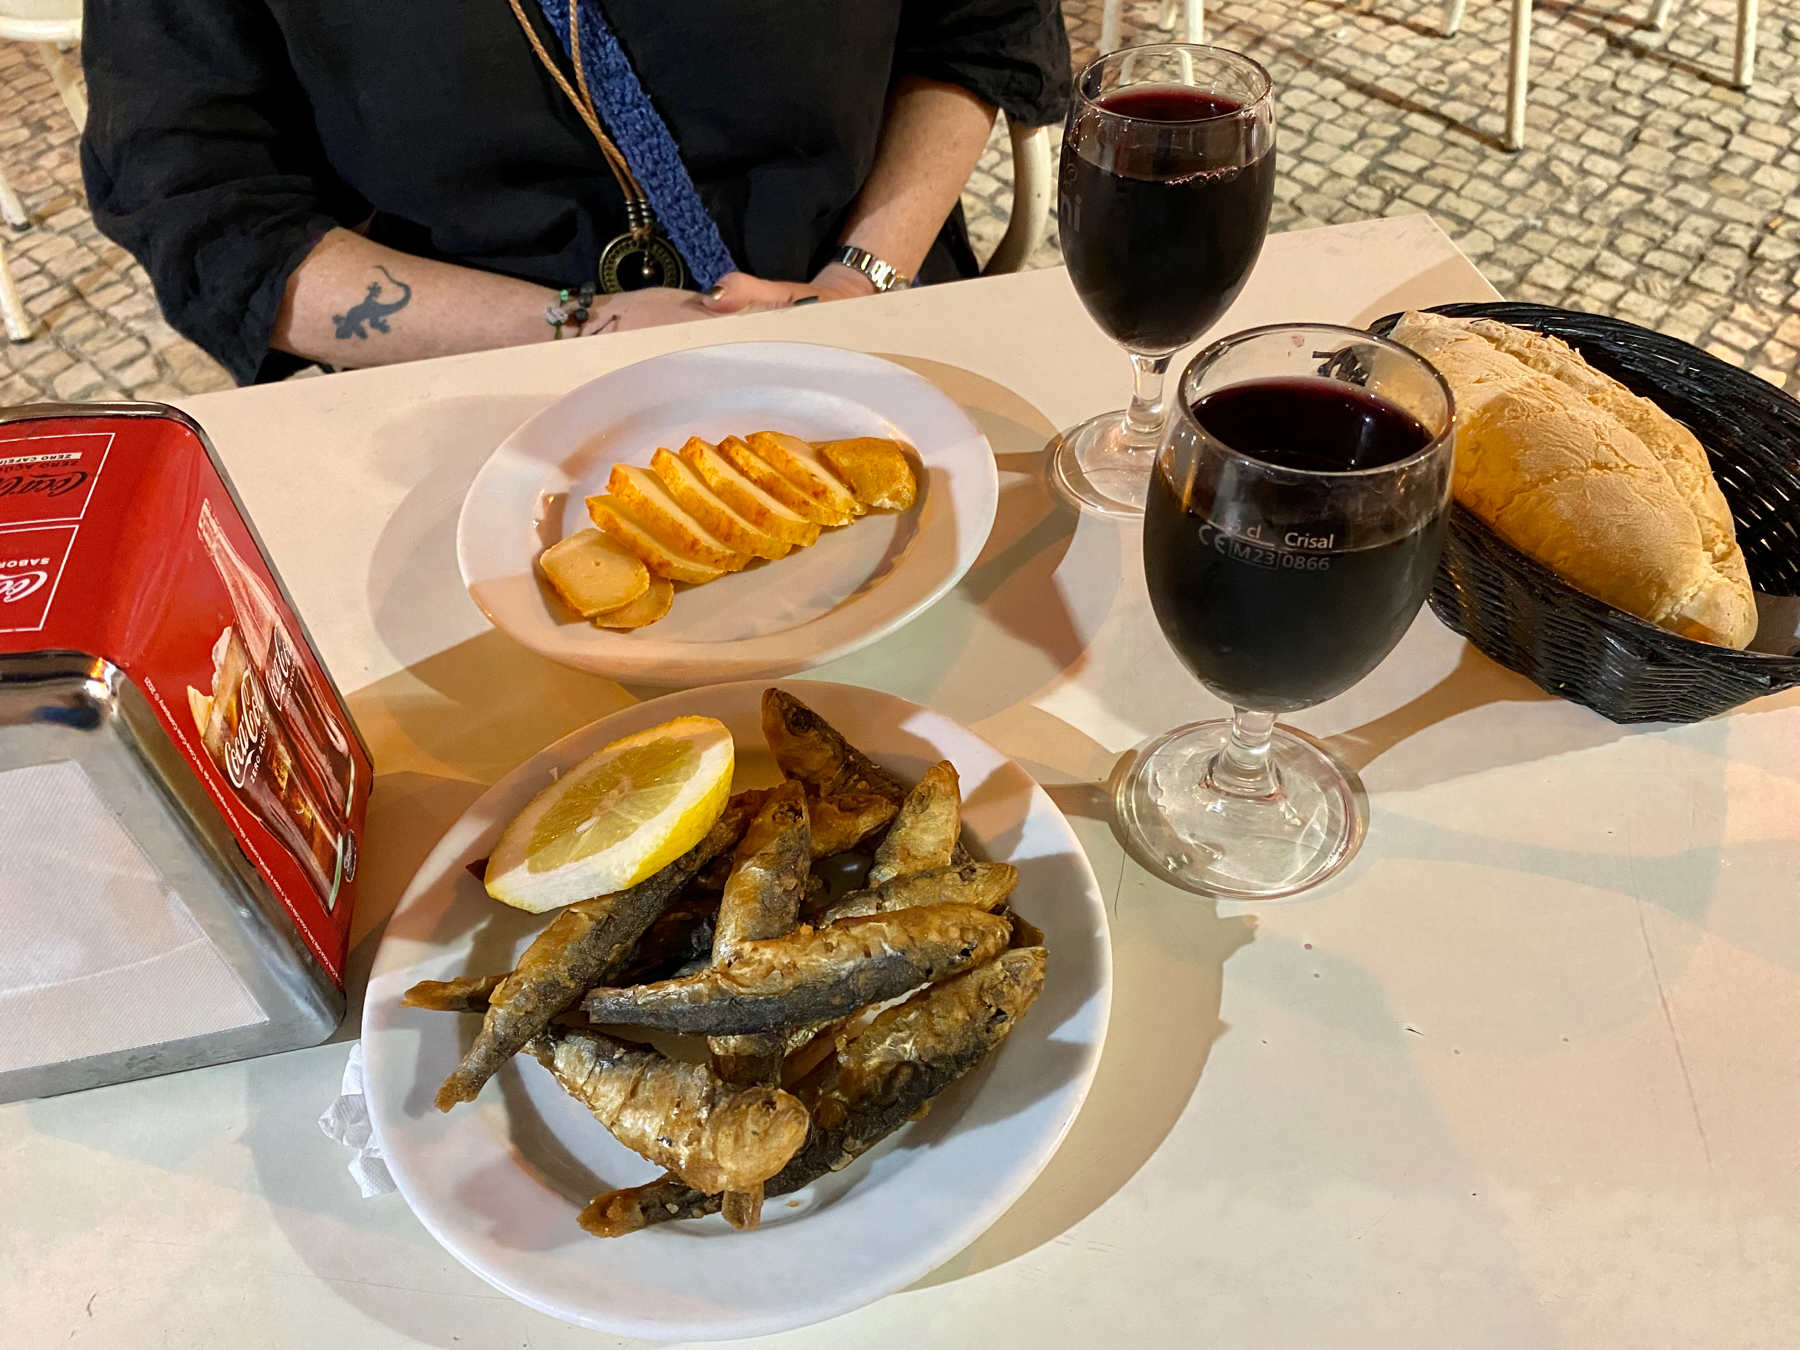 Plates of fried sardines and cheese, glasses of wine and small loaf of bread on a table